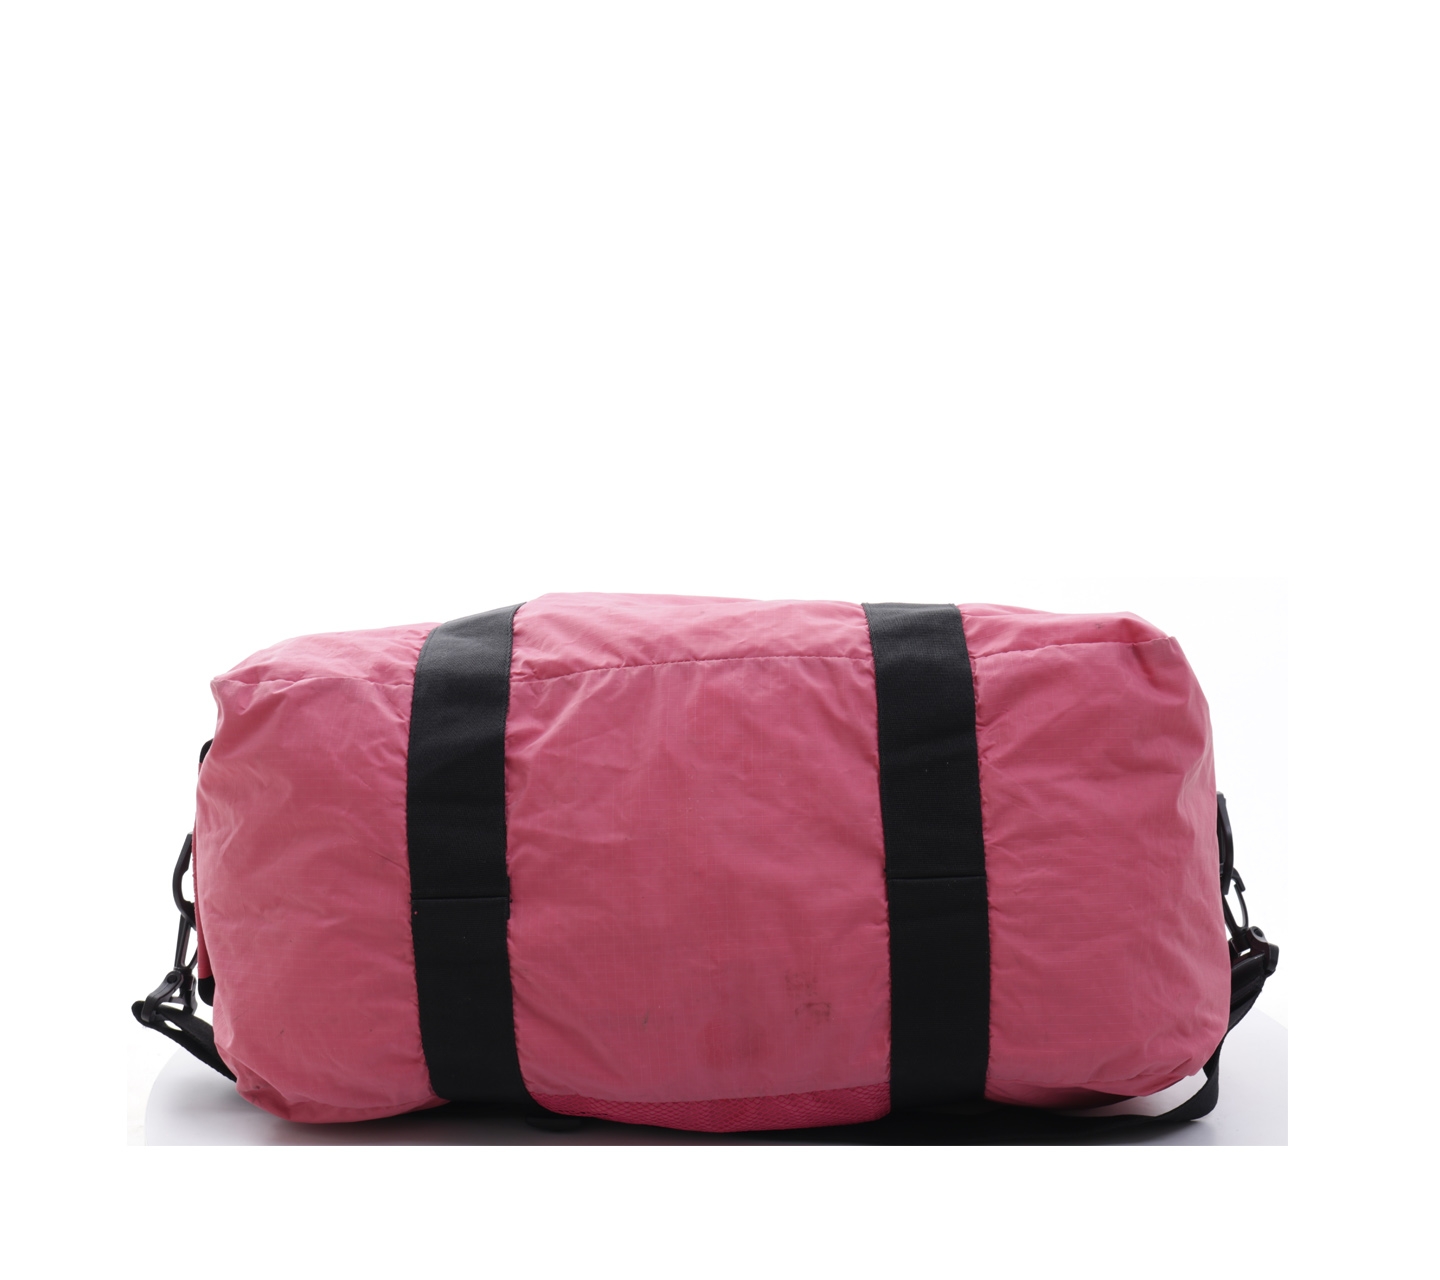 Benetton Pink Luggage and Travel Bag